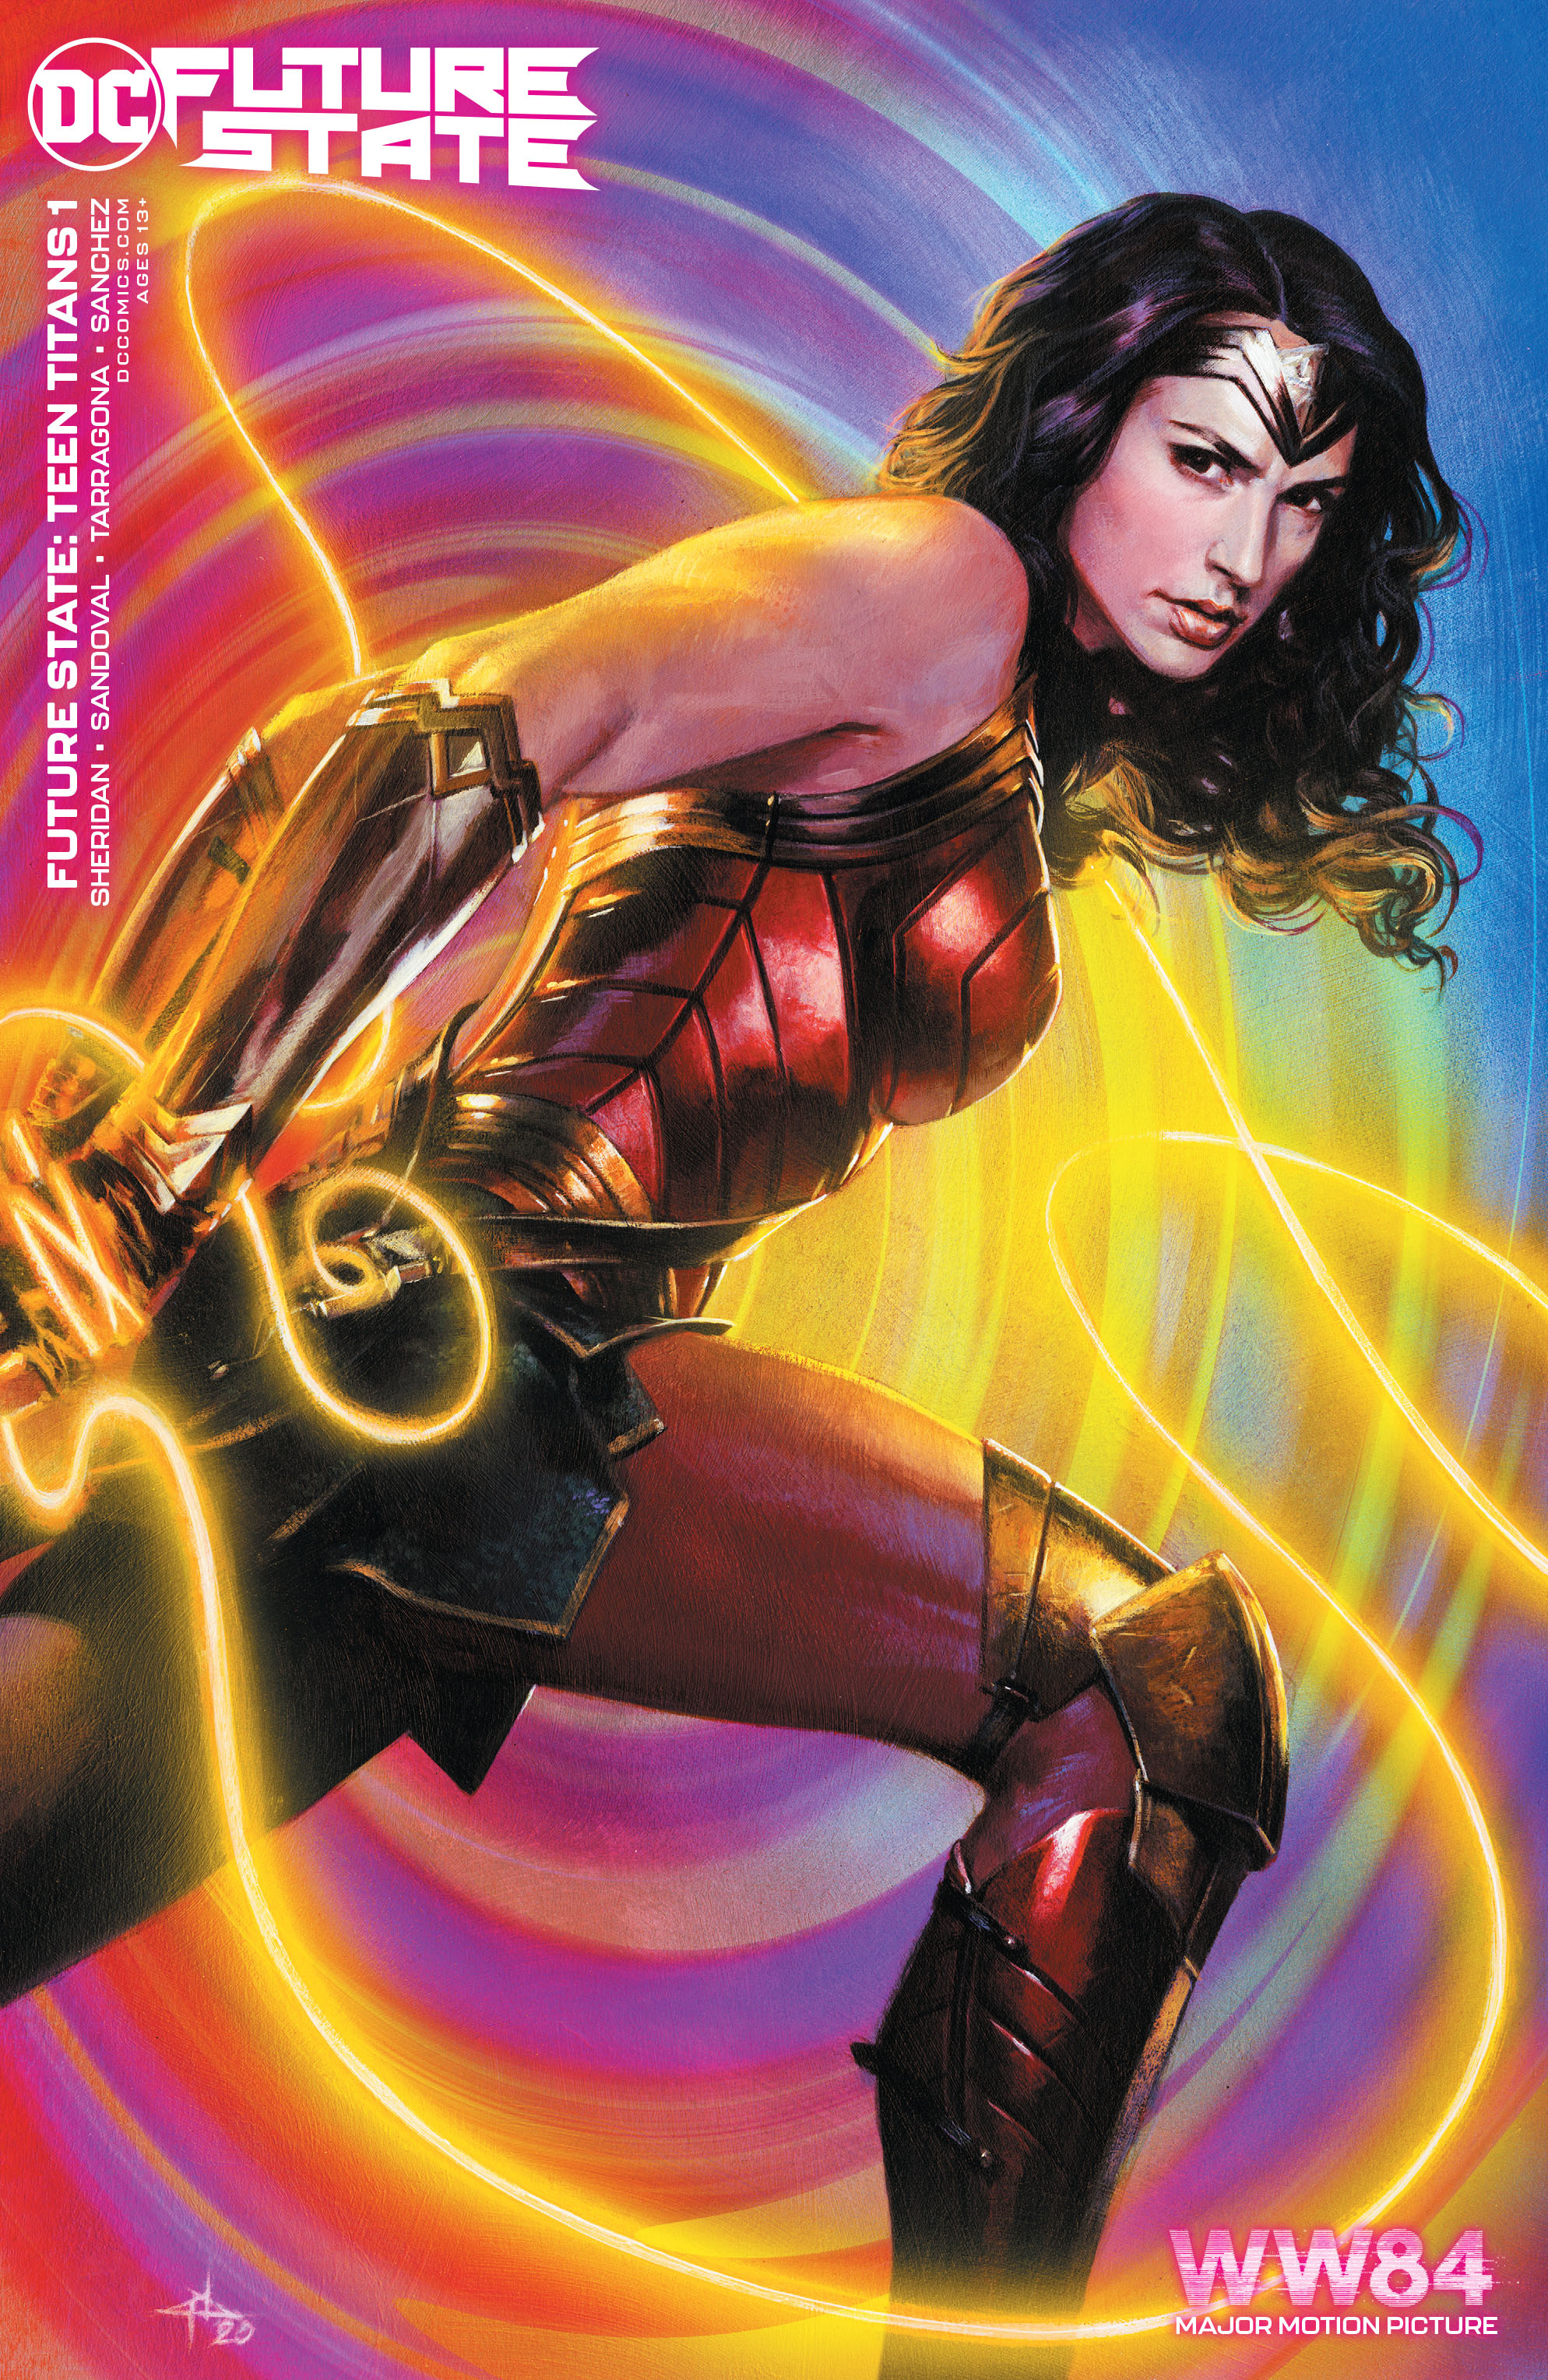 FUTURE STATE TEEN TITANS #1 (OF 2) CVR C WONDER WOMAN 1984 GABRIELLE DELL'OTTO CARD STOCK VARIANT